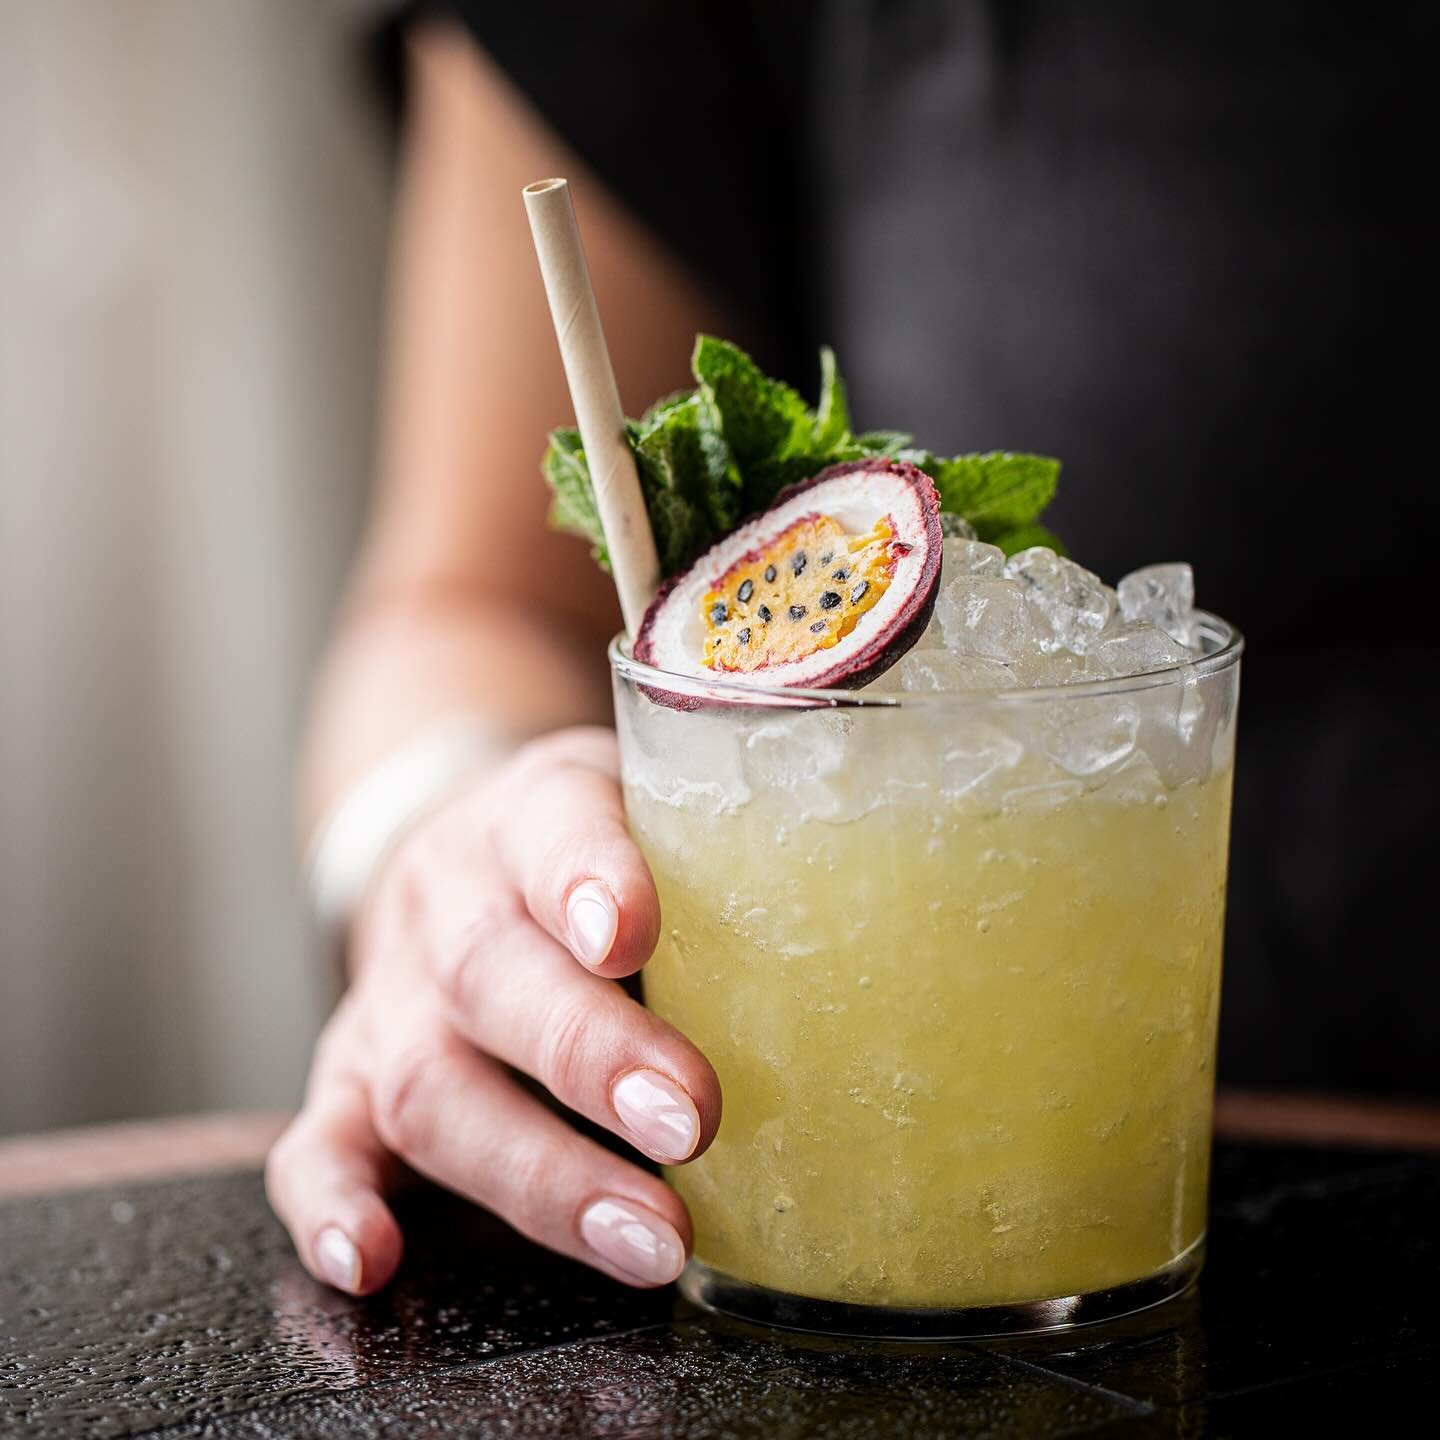 Caipirinhas, Margaritas, and more - all freshly shaken (or stirred) cocktails await on our #LosMochisLondonCity rooftop terrace.

In honour of #WorldCocktailDay tomorrow, take a seat during golden hour with an alluring cocktail in hand as you settle 